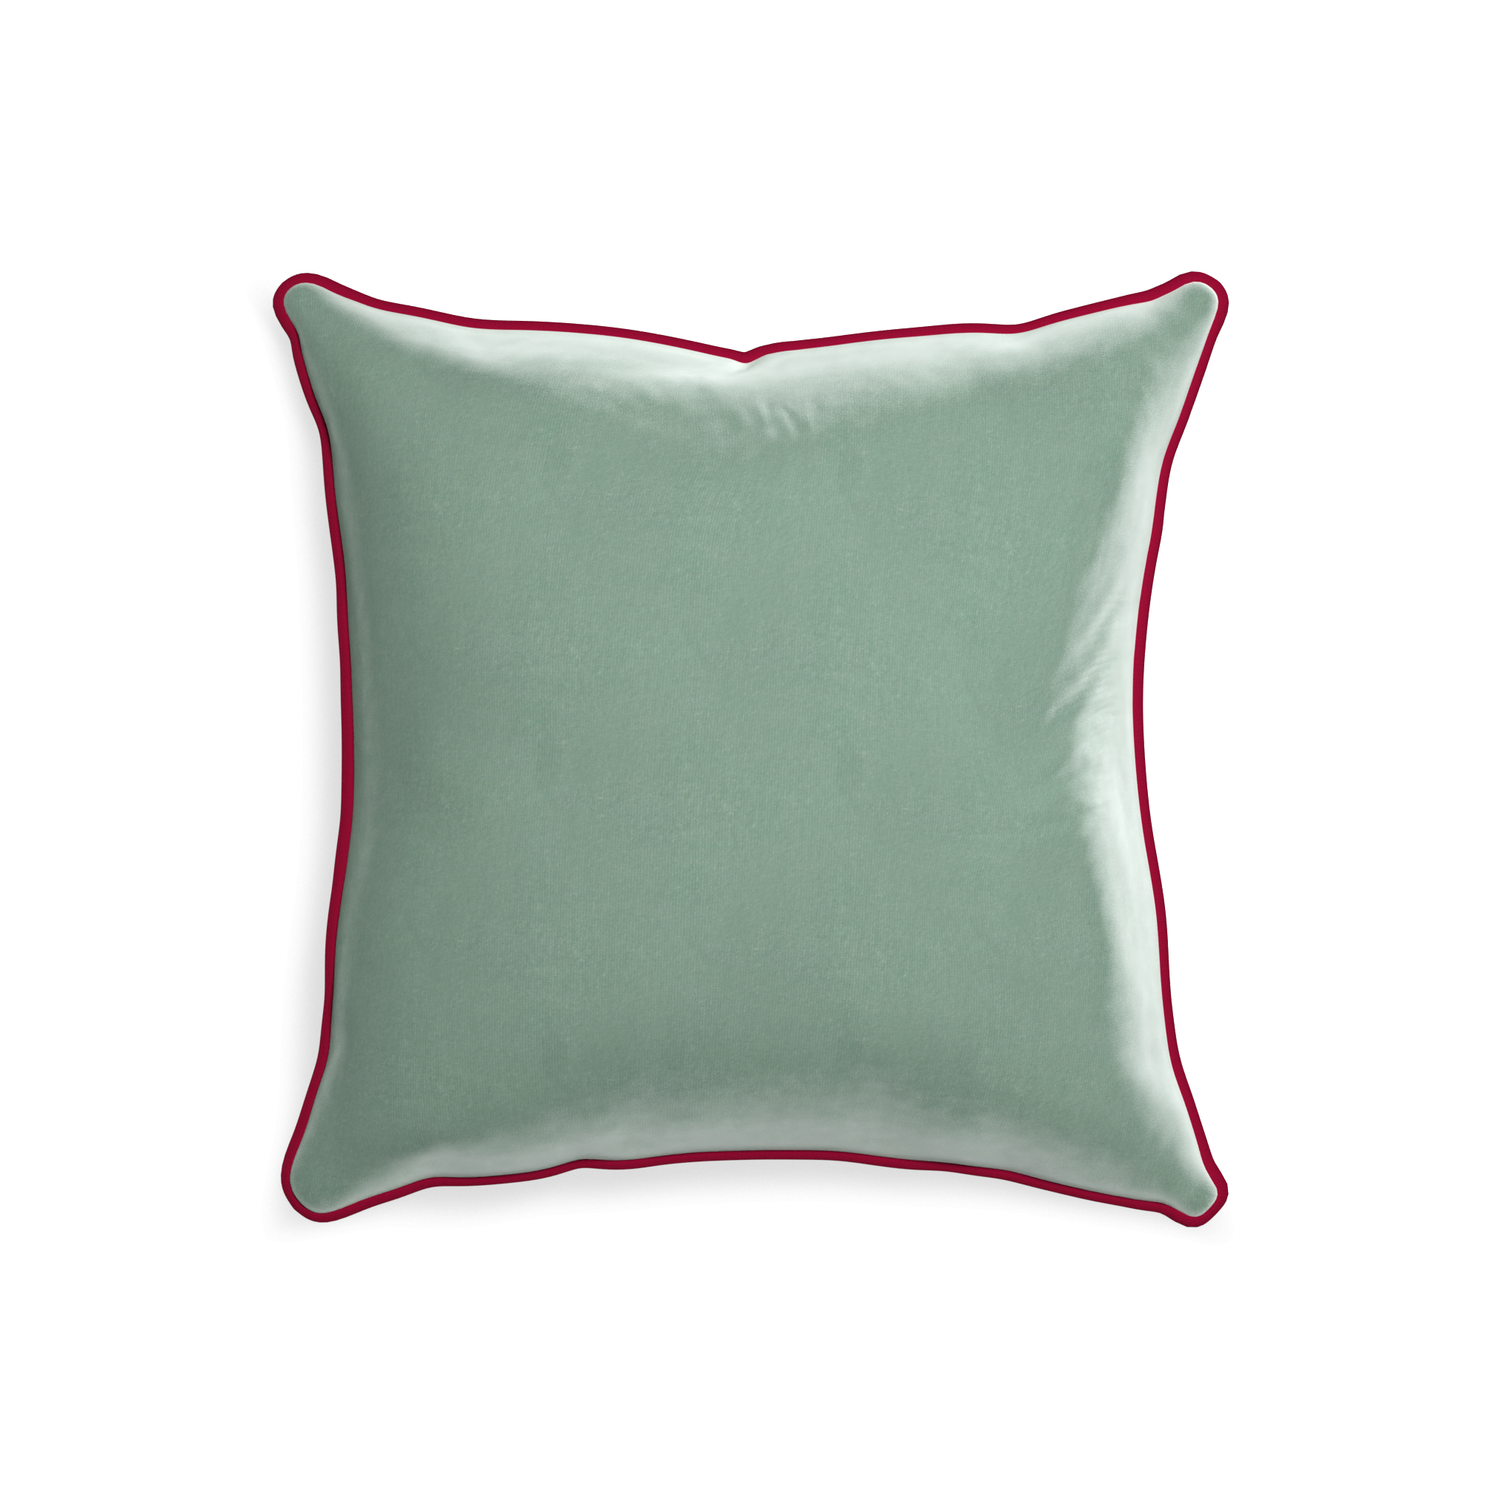 square blue green velvet pillow with dark red piping